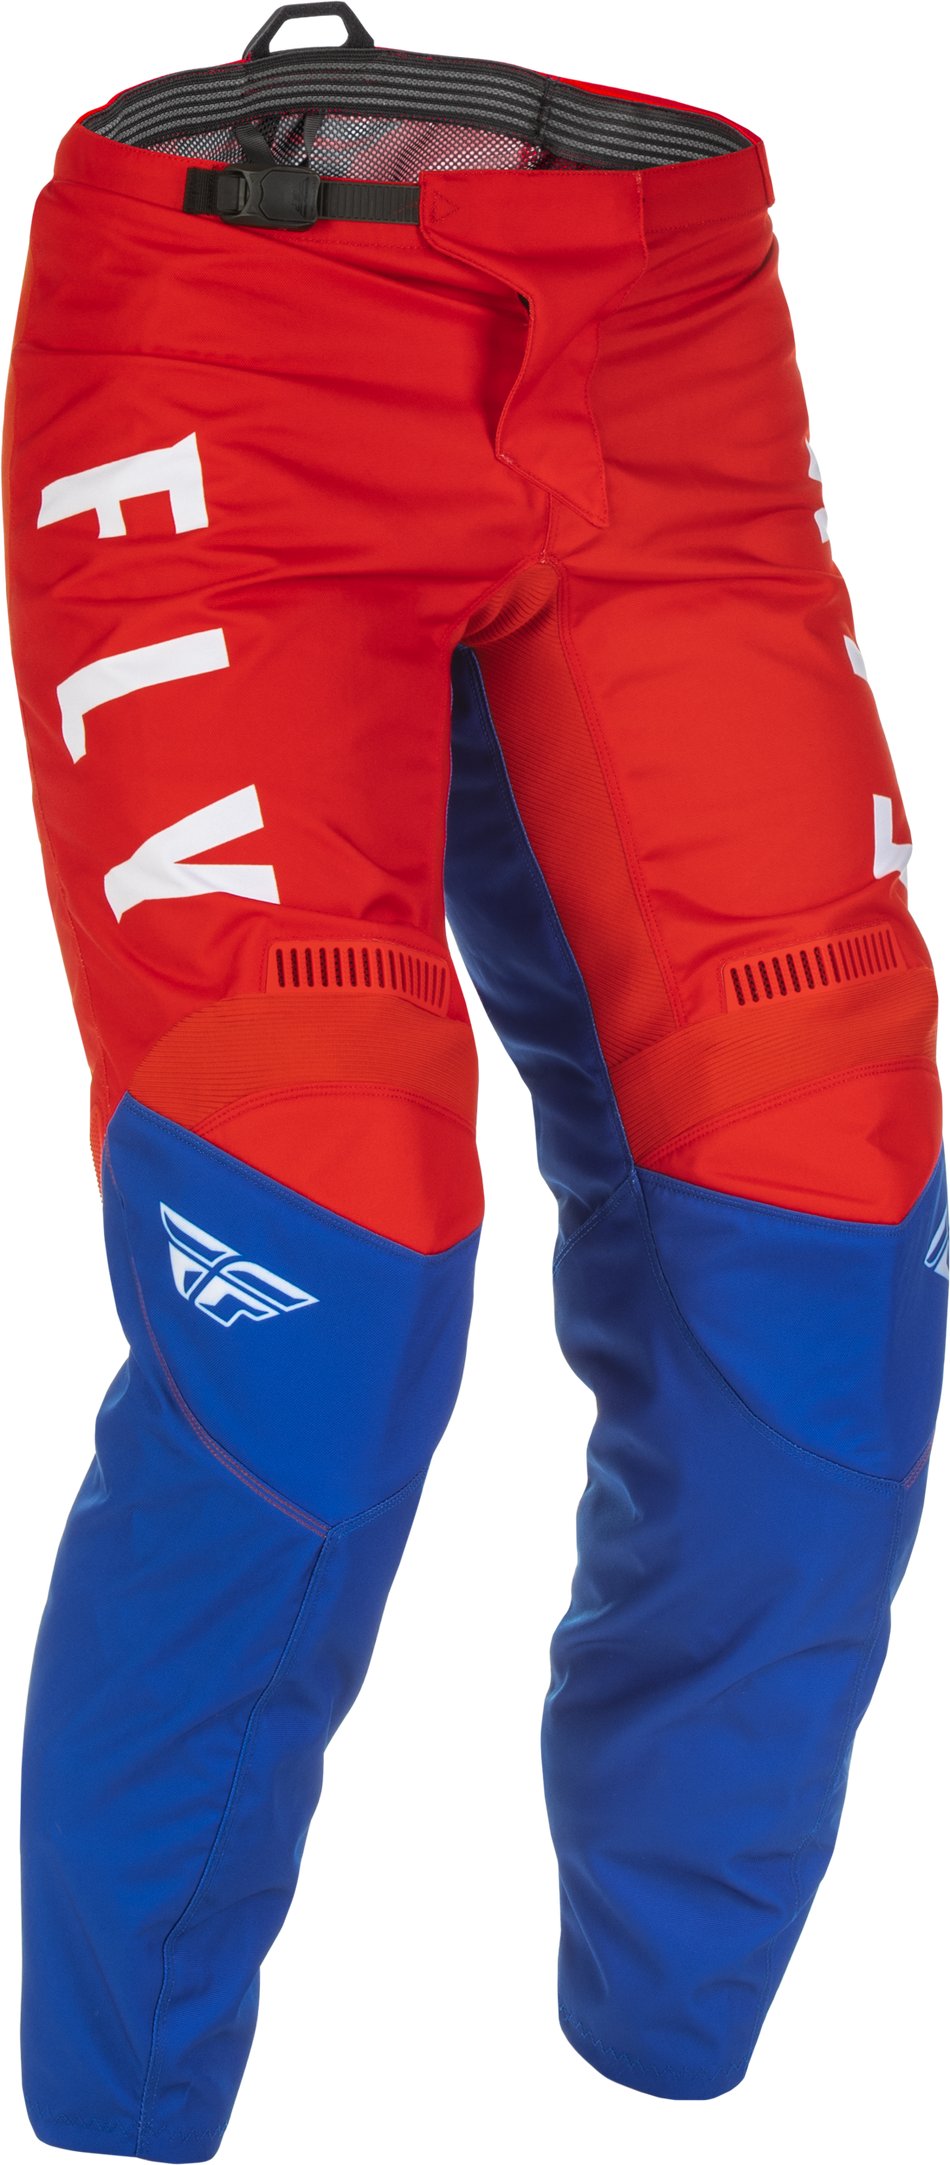 FLY RACING F-16 Pants Red/White/Blue Sz 36 375-93436